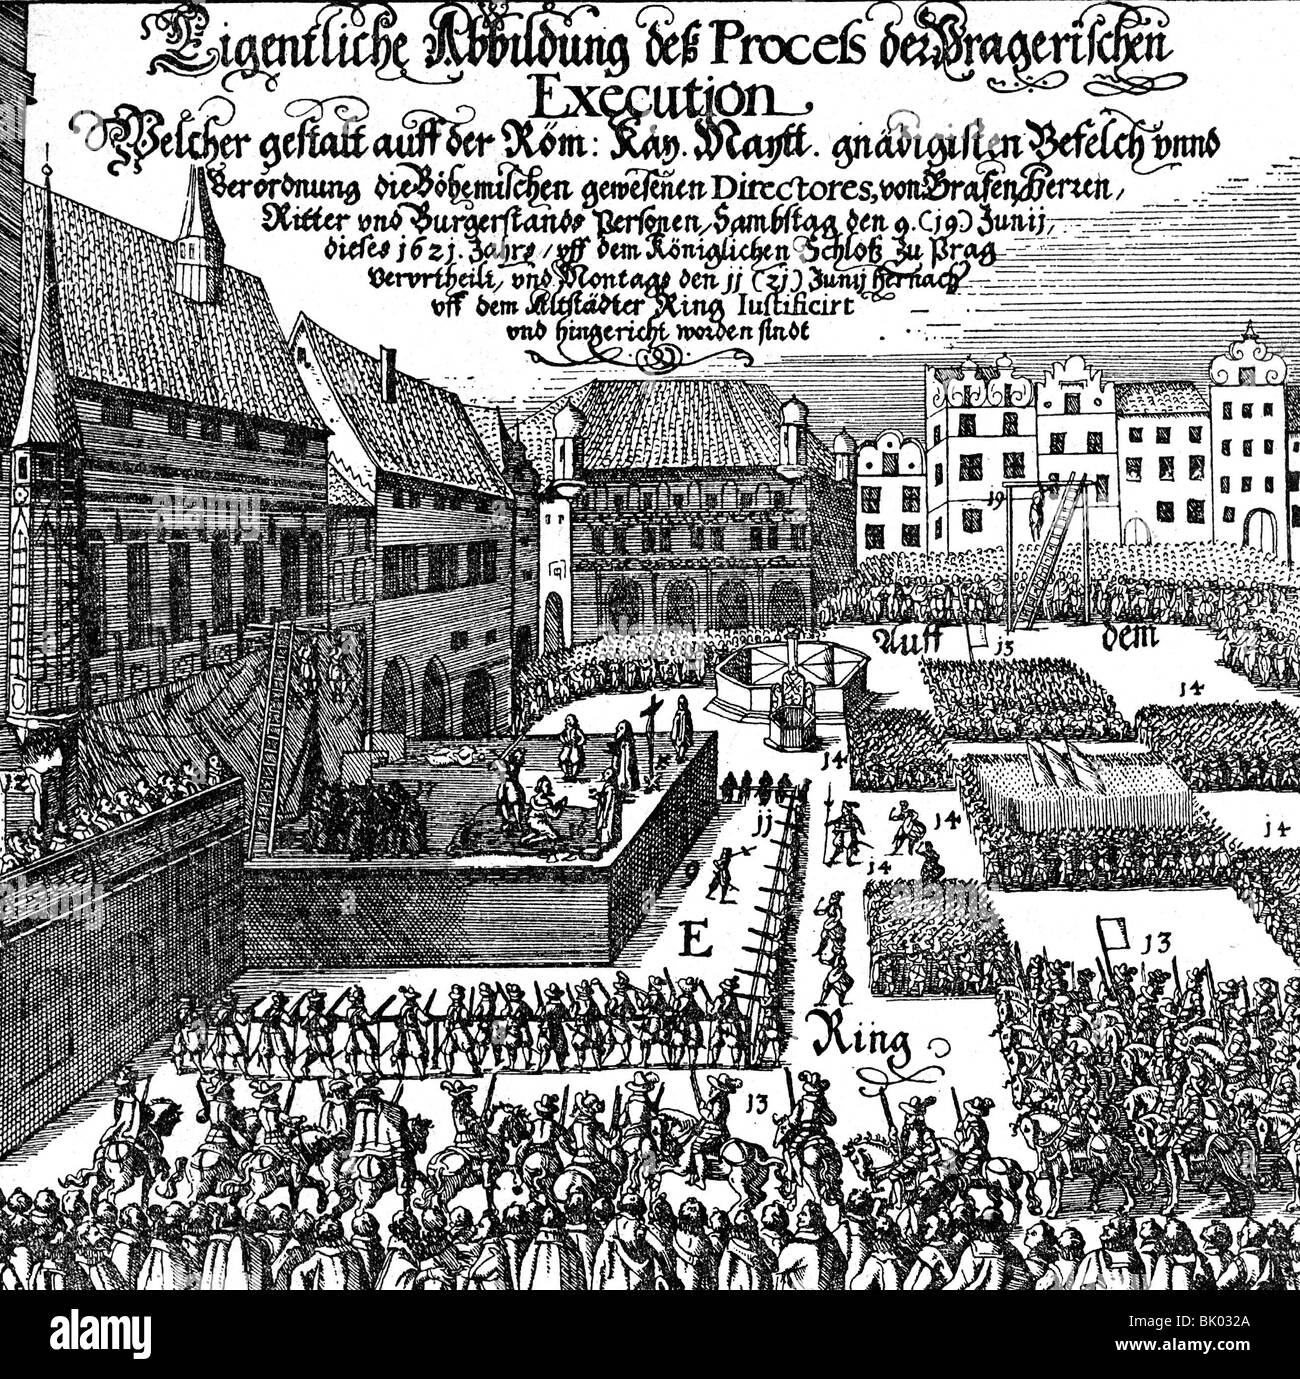 events, Thirty Years War 1618 - 1648, Bohemian-Palatinate War 1618 - 1626, execution of Bohemian insurgents in Prague, 21.6.1621, contemporary copper engraving, , Stock Photo